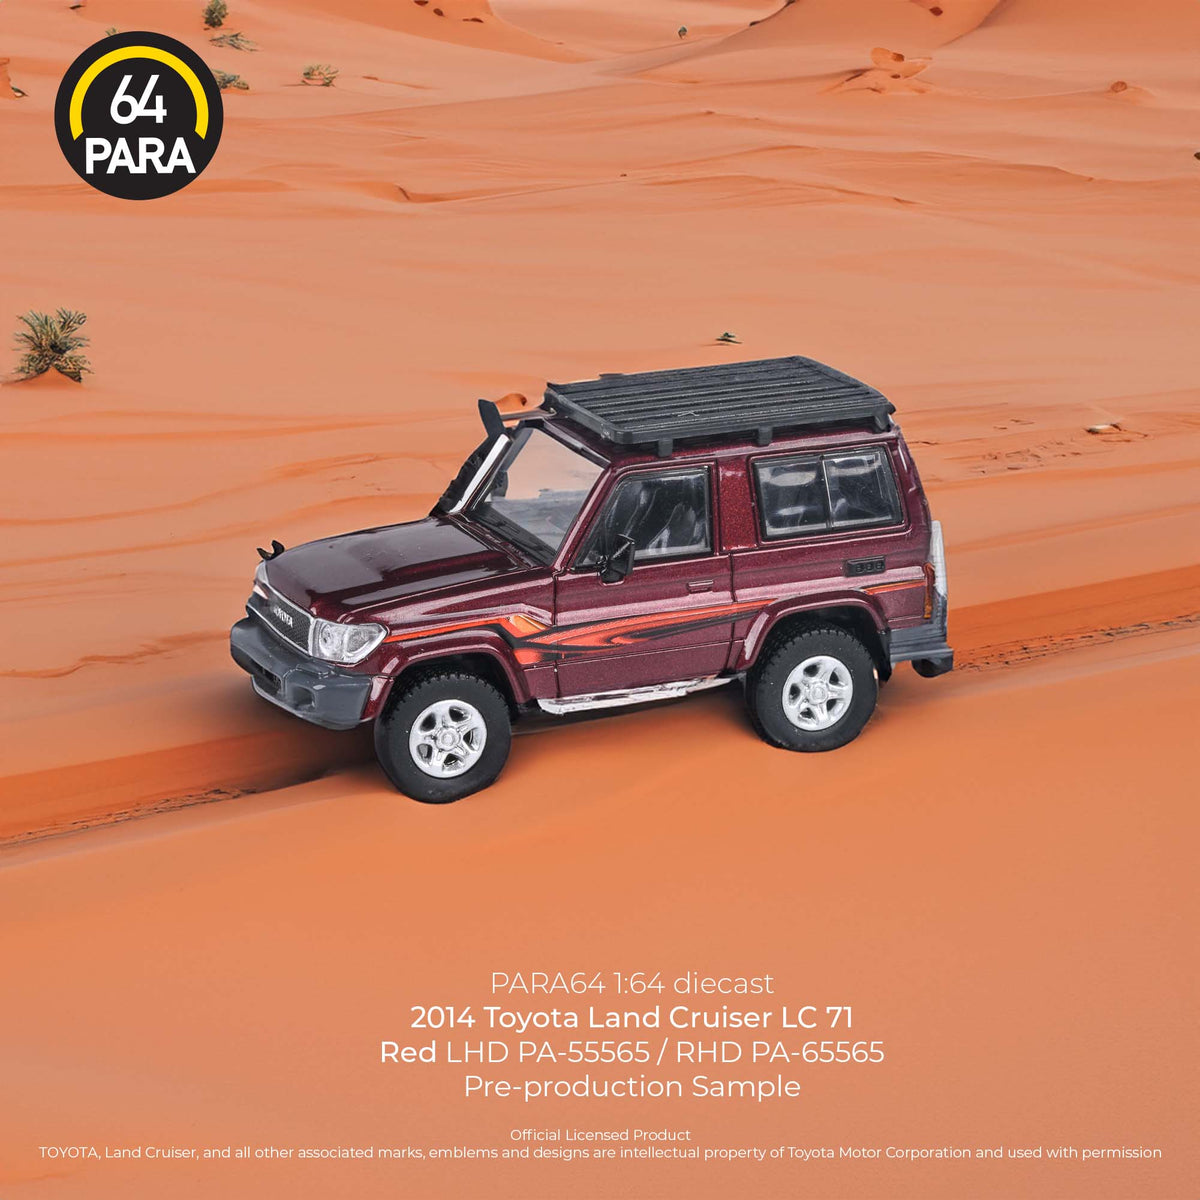 PREORDER PARA64 1/64 2014 Toyota Land Cruiser 71 Red w/roof rack PA-55565  (Approx. Release Date : November Q2 2024 subject to manufacturer's final 